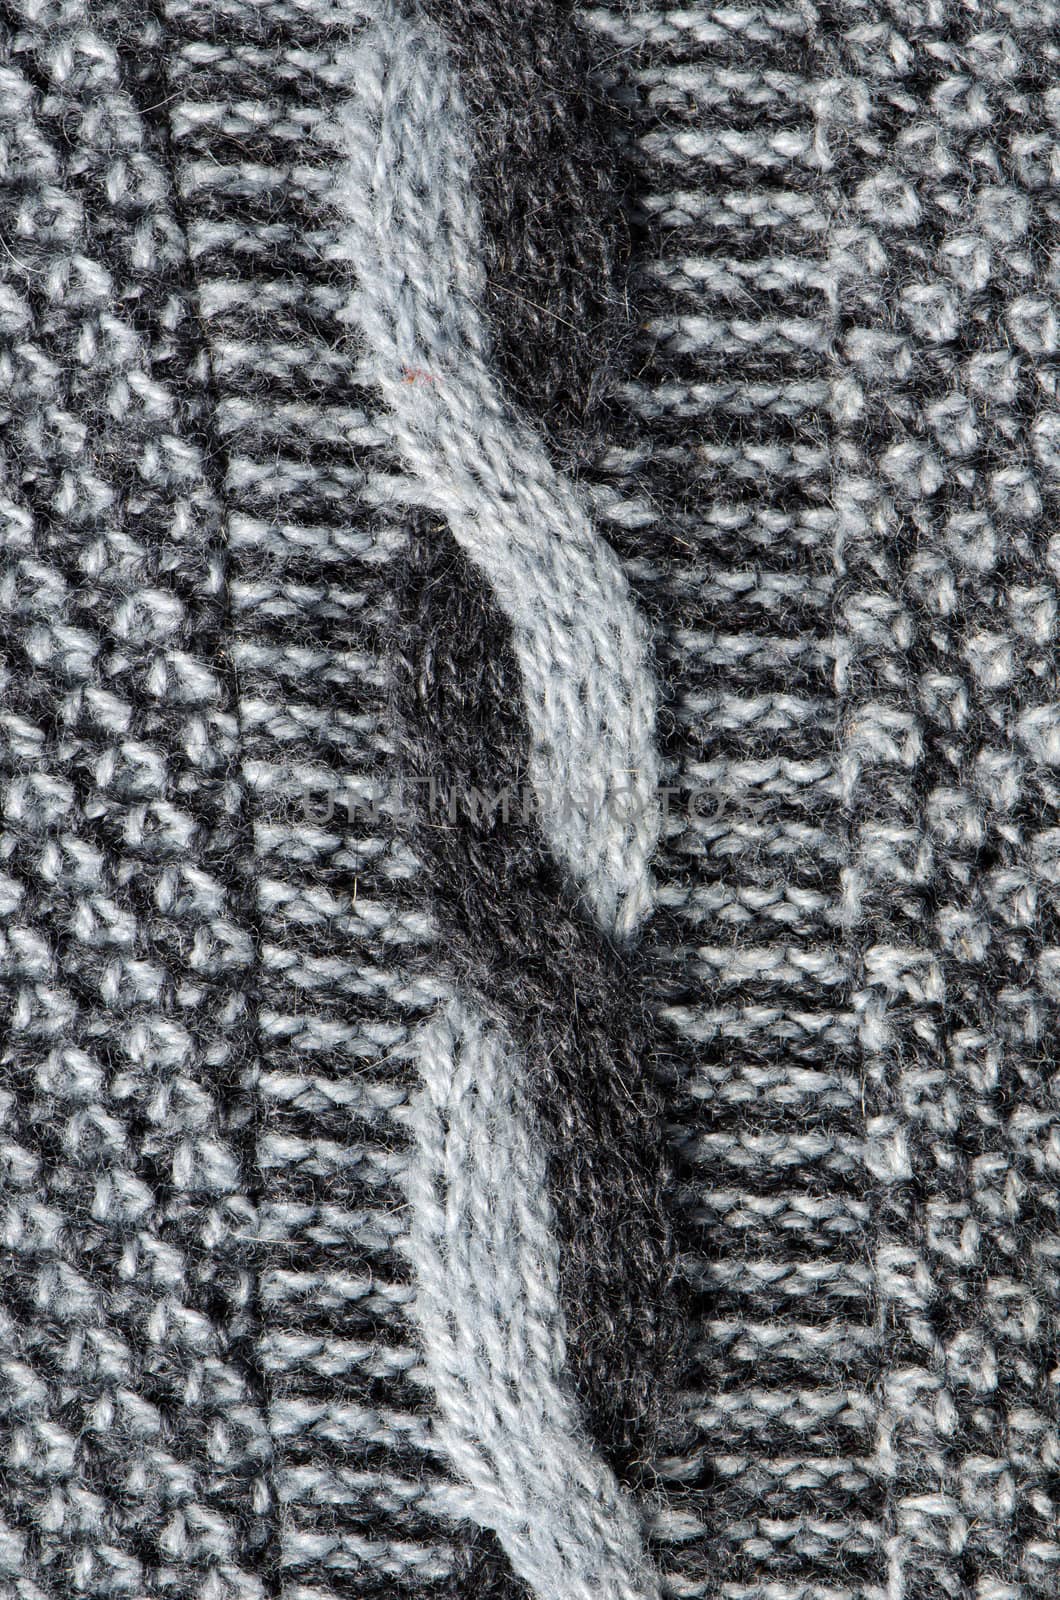 Interesting knit wool background of old handmade sweater pattern and material